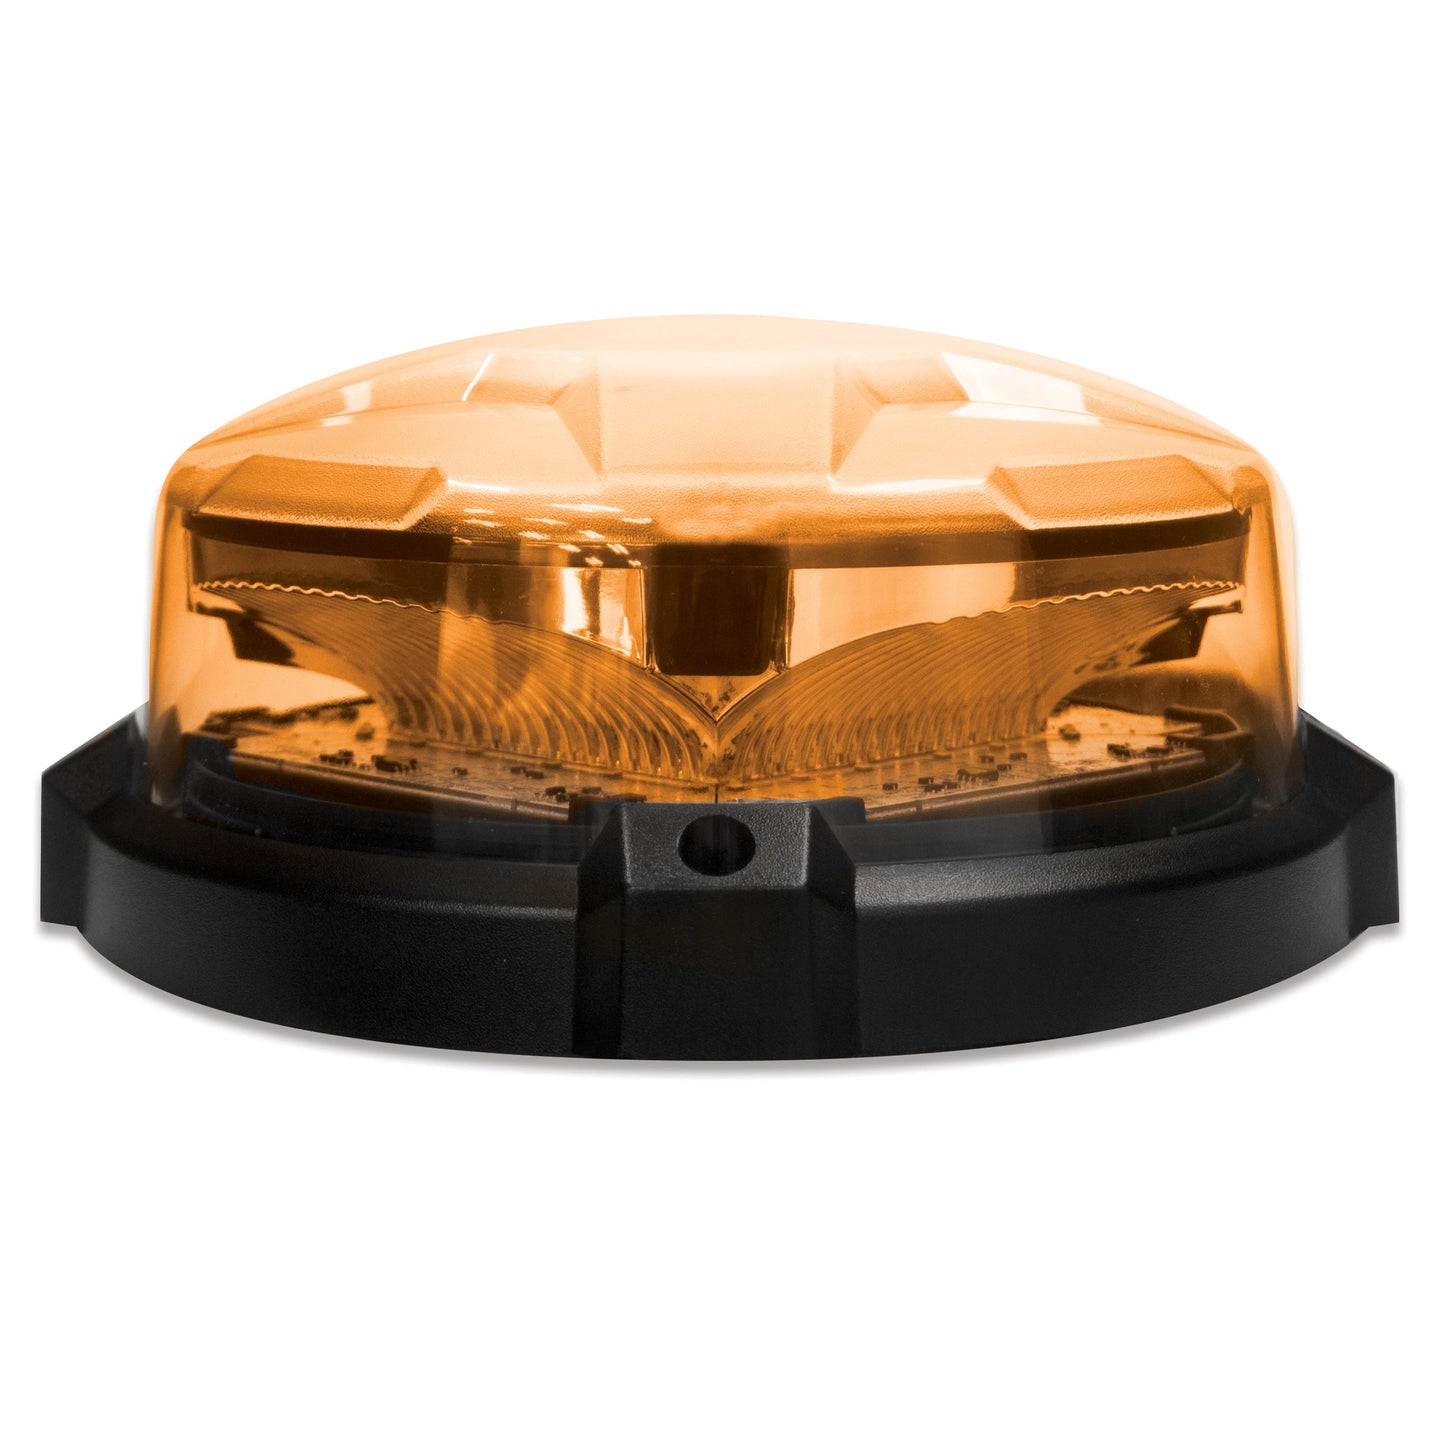 Soundoff Signal PNRBCDMLR Low Dome For Nroads® Beacons - Red